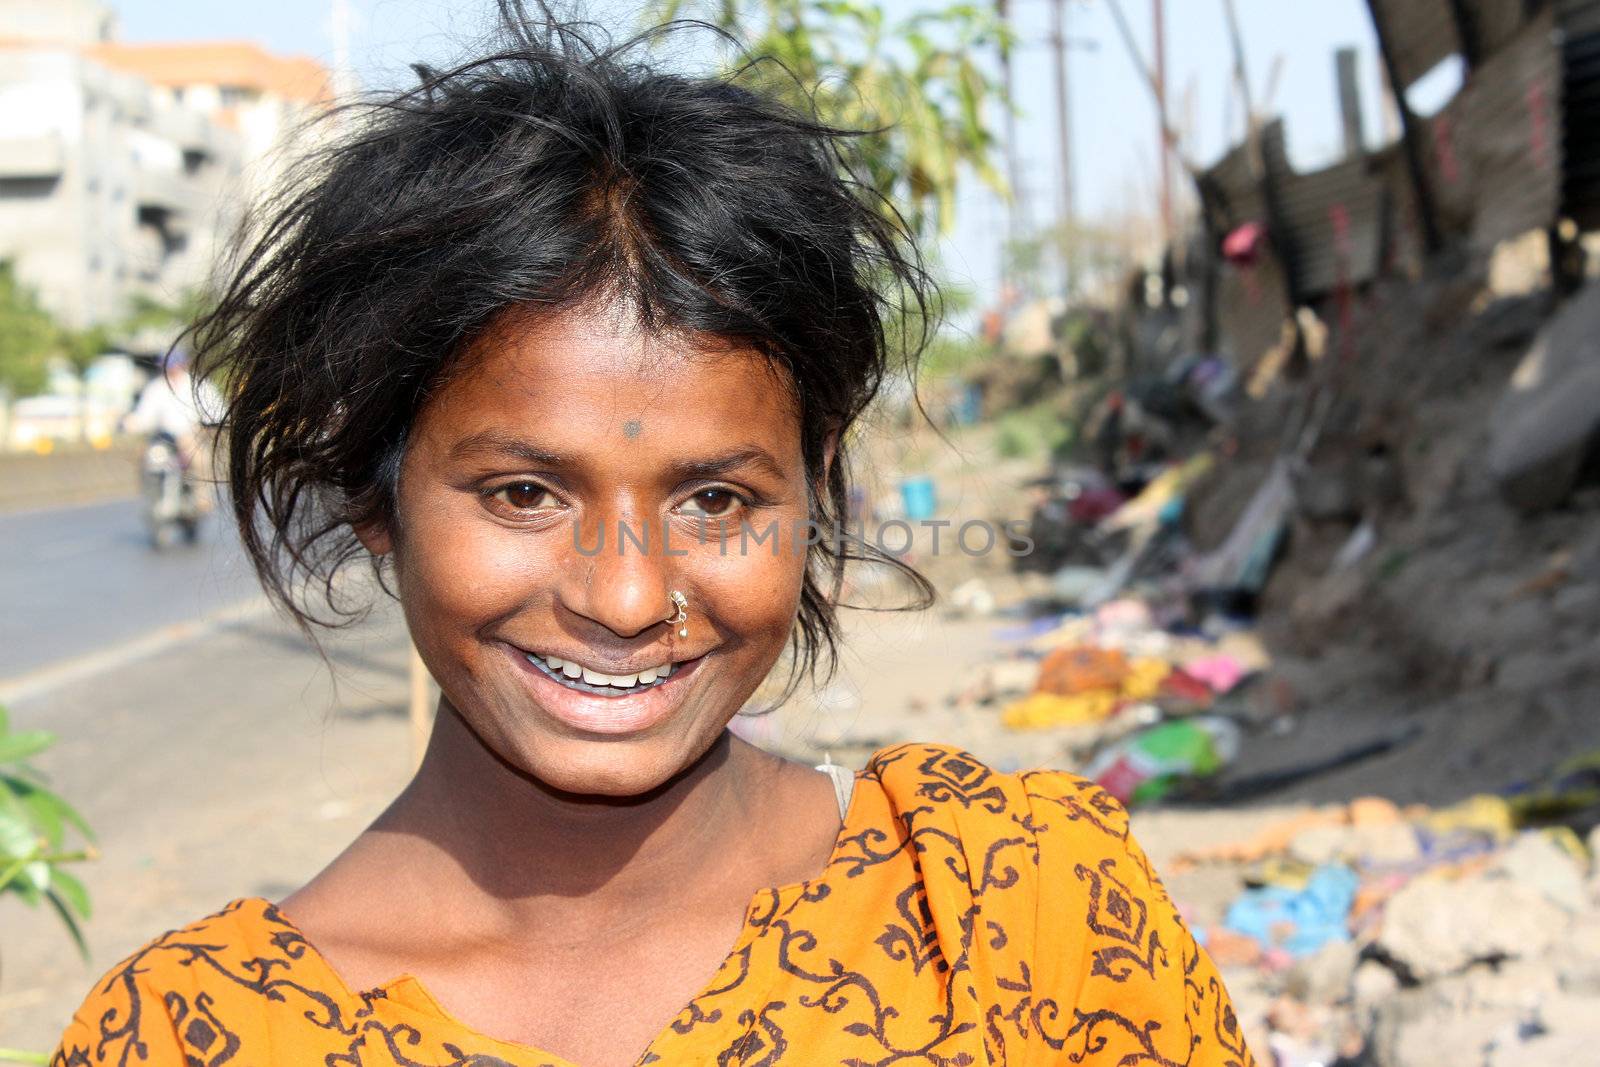 A portrait of a happily smiling poor Indian teenager, on the streetside.